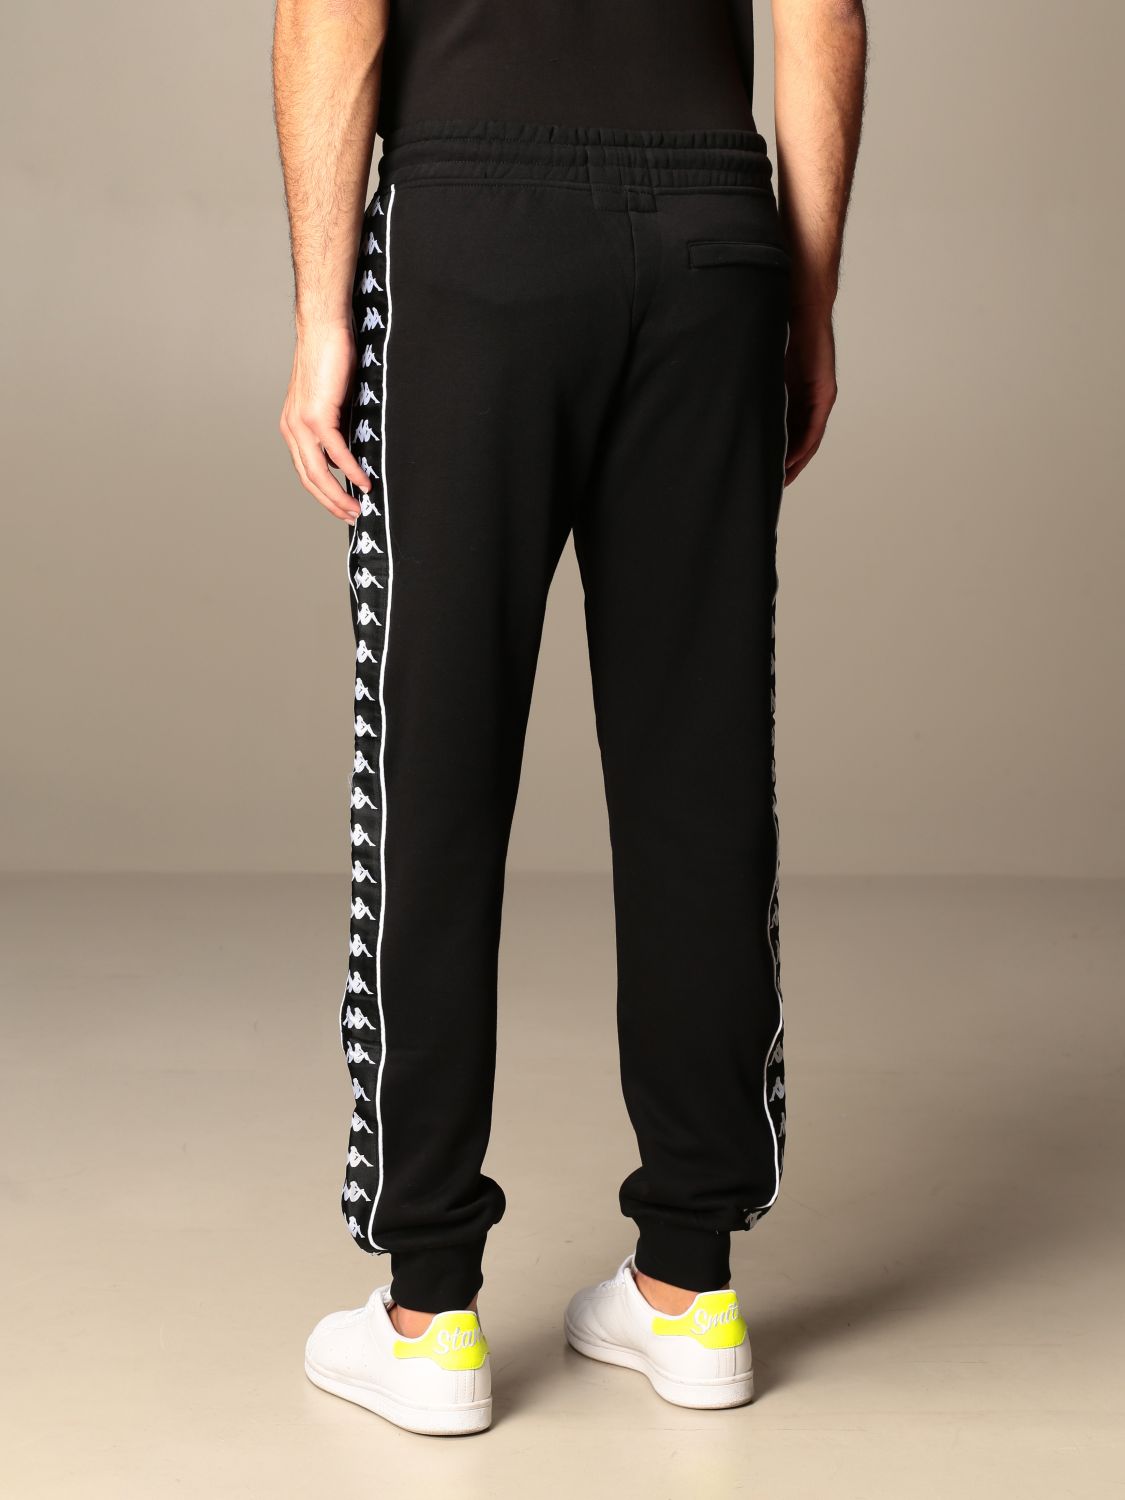 KAPPA: jogging trousers with logoed bands - | Kappa pants 304KPN0 online on GIGLIO.COM